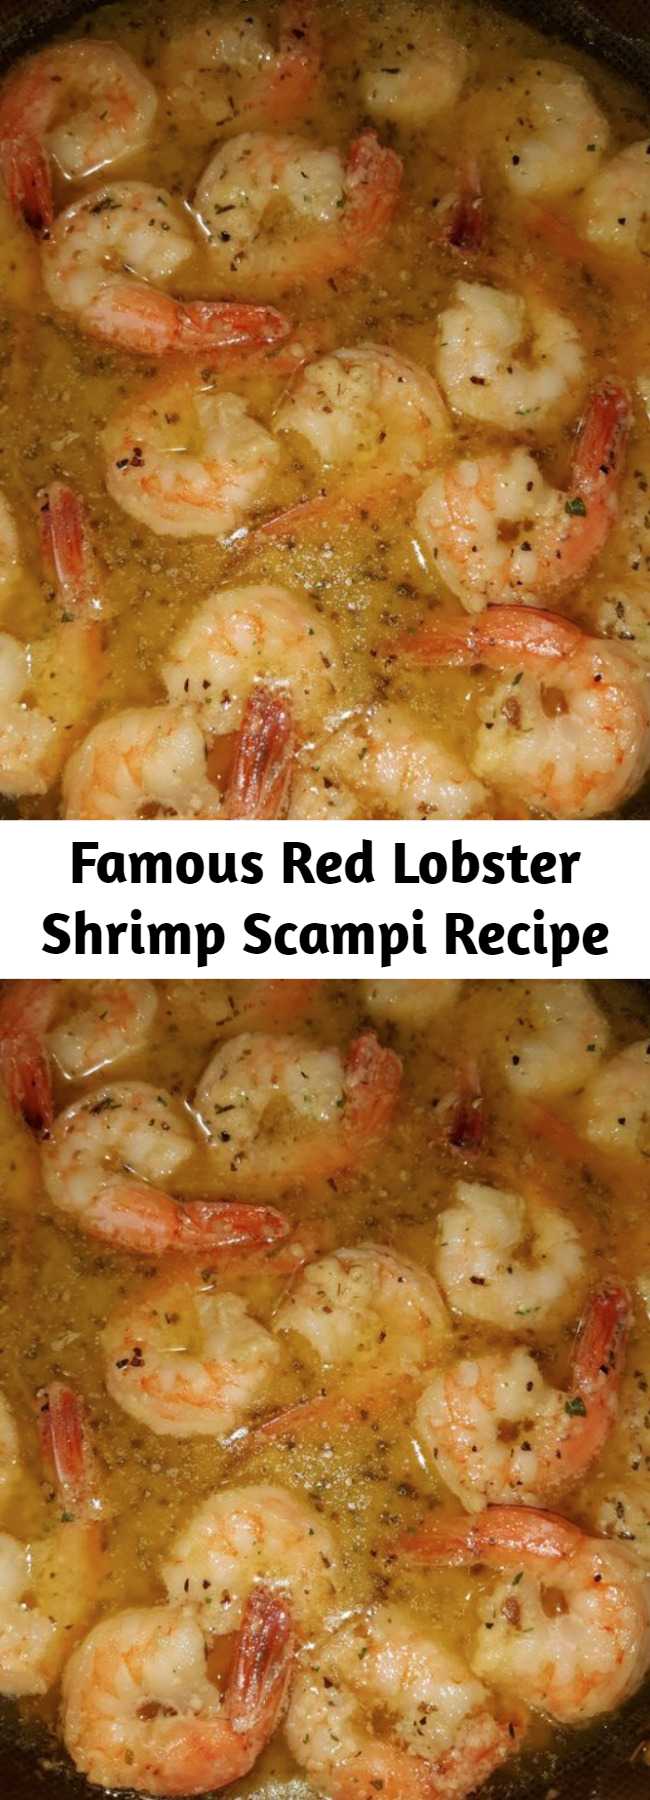 Famous Red Lobster Shrimp Scampi Recipe - This is a family favorite just as is. The flavors are fantastic. Very easy to make too.